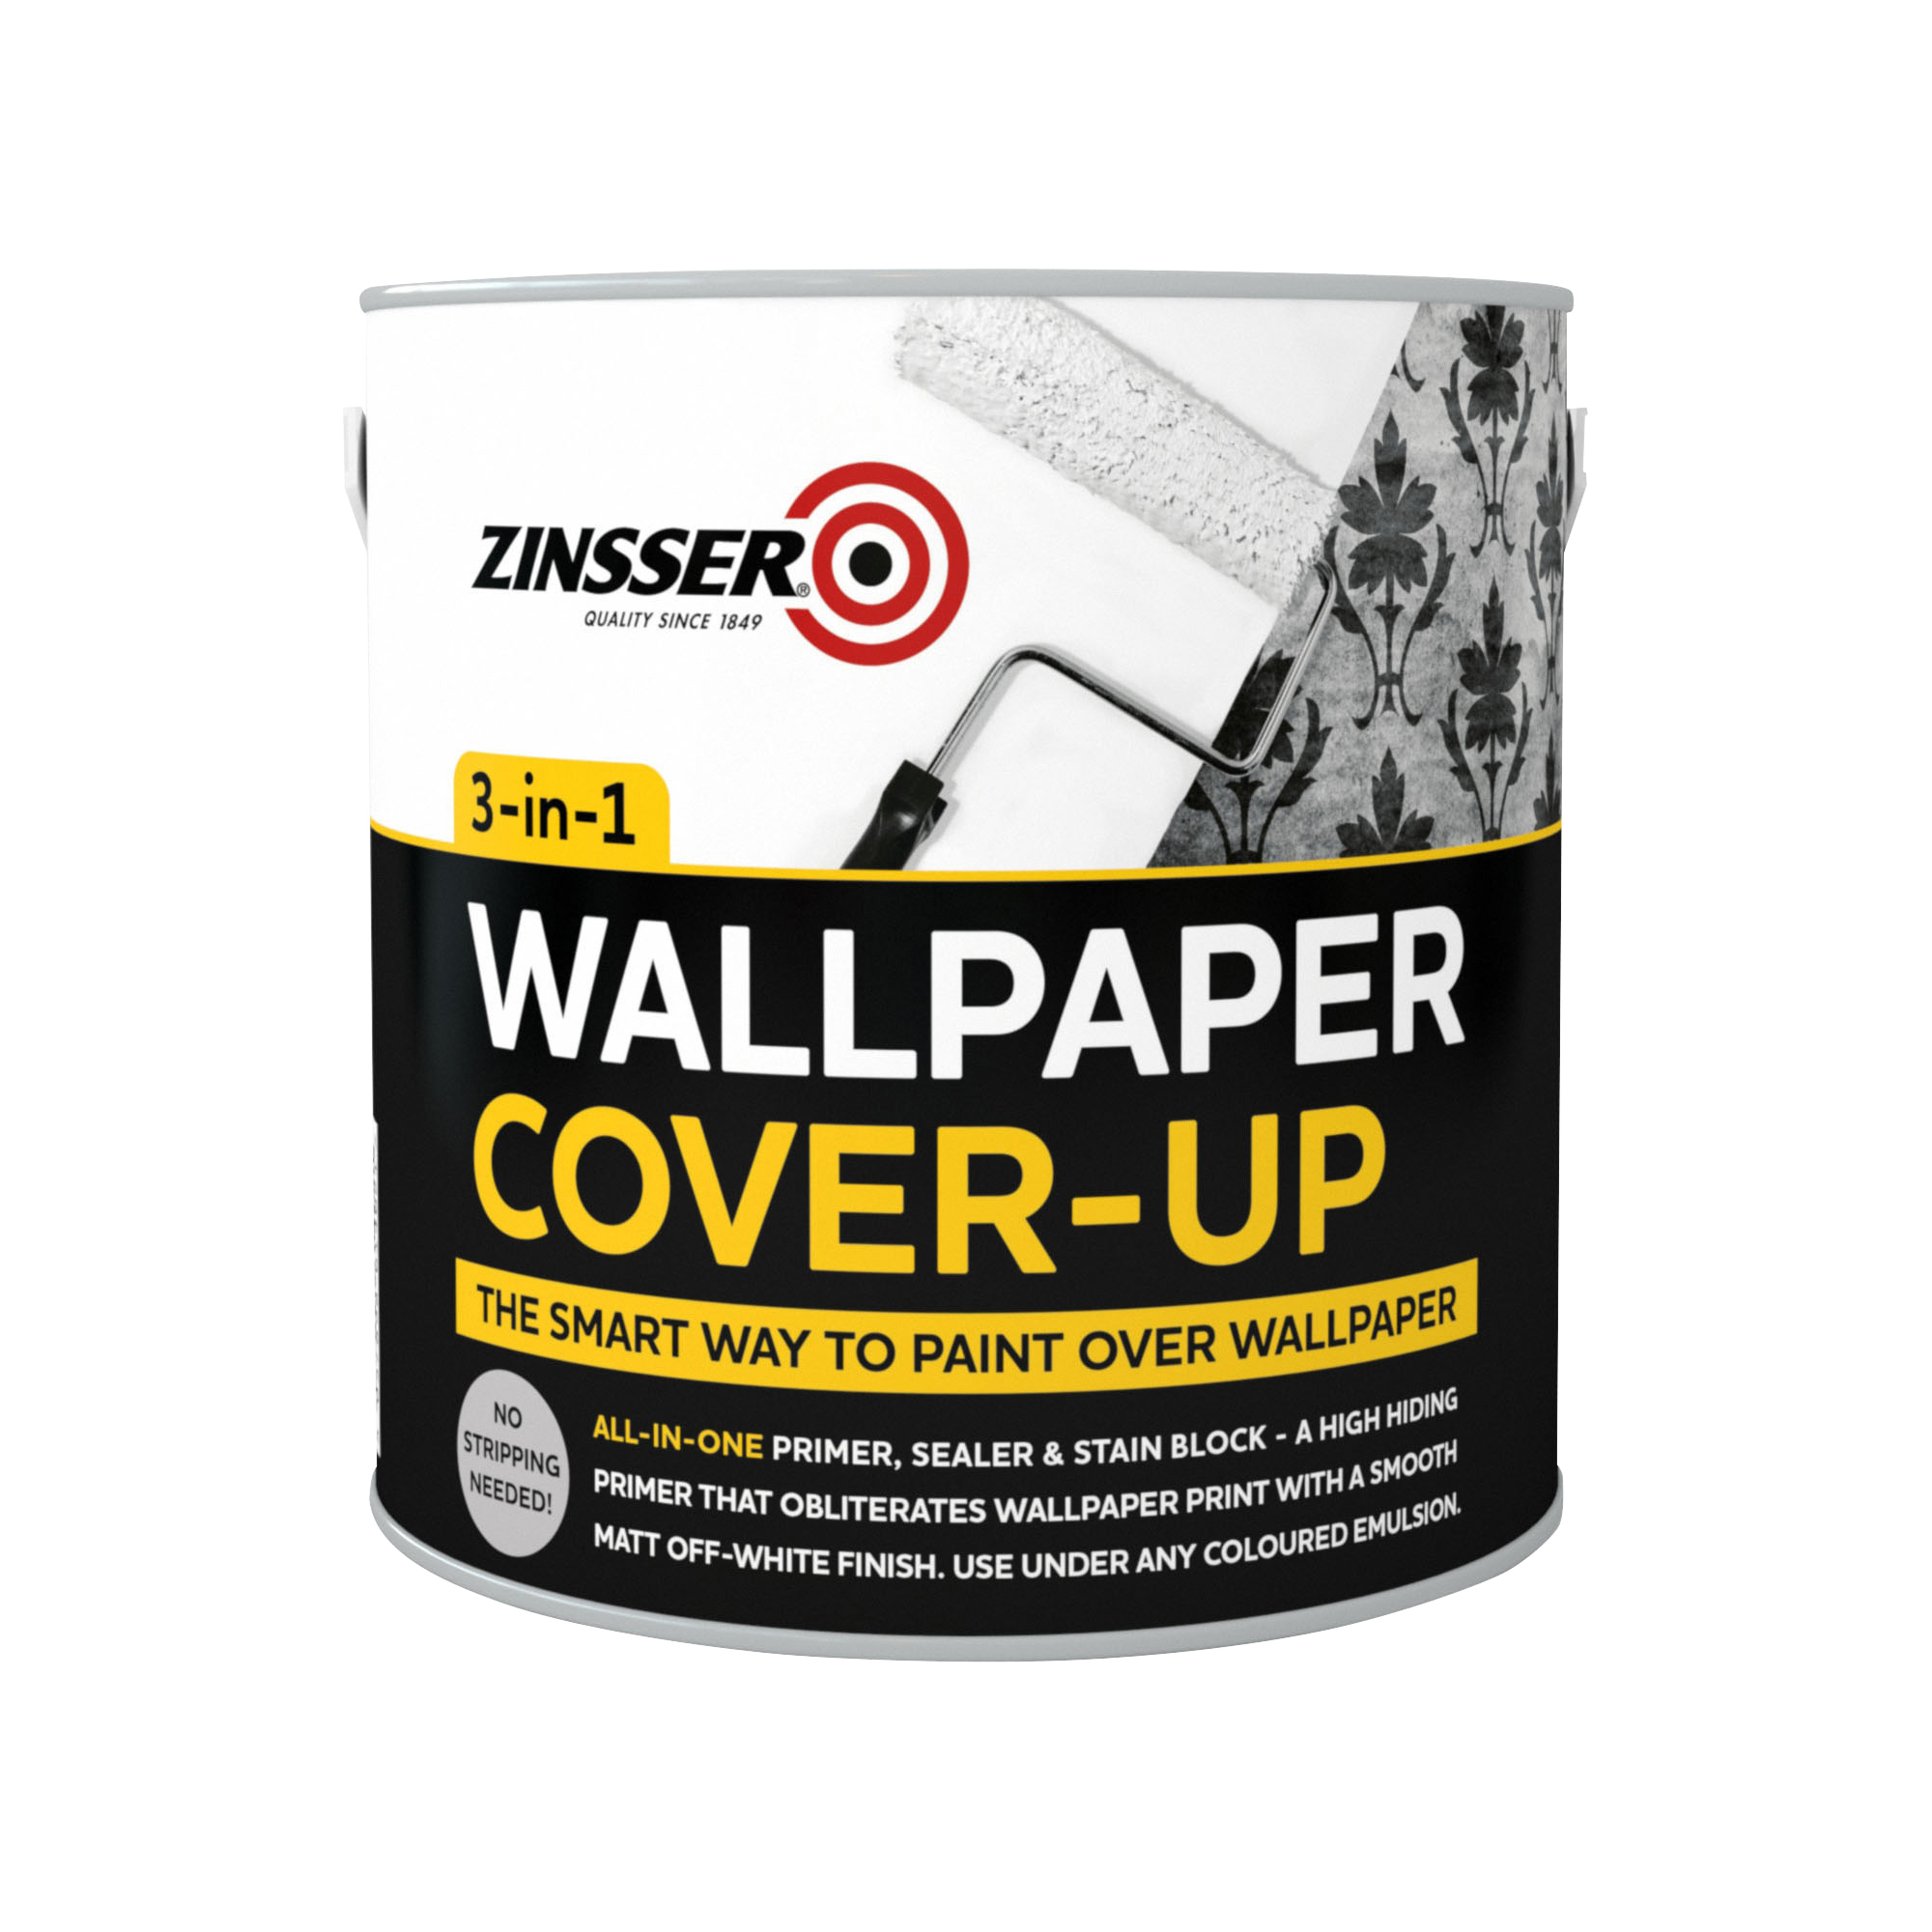 Pro tips for painting over wallpaper dulux derator centre